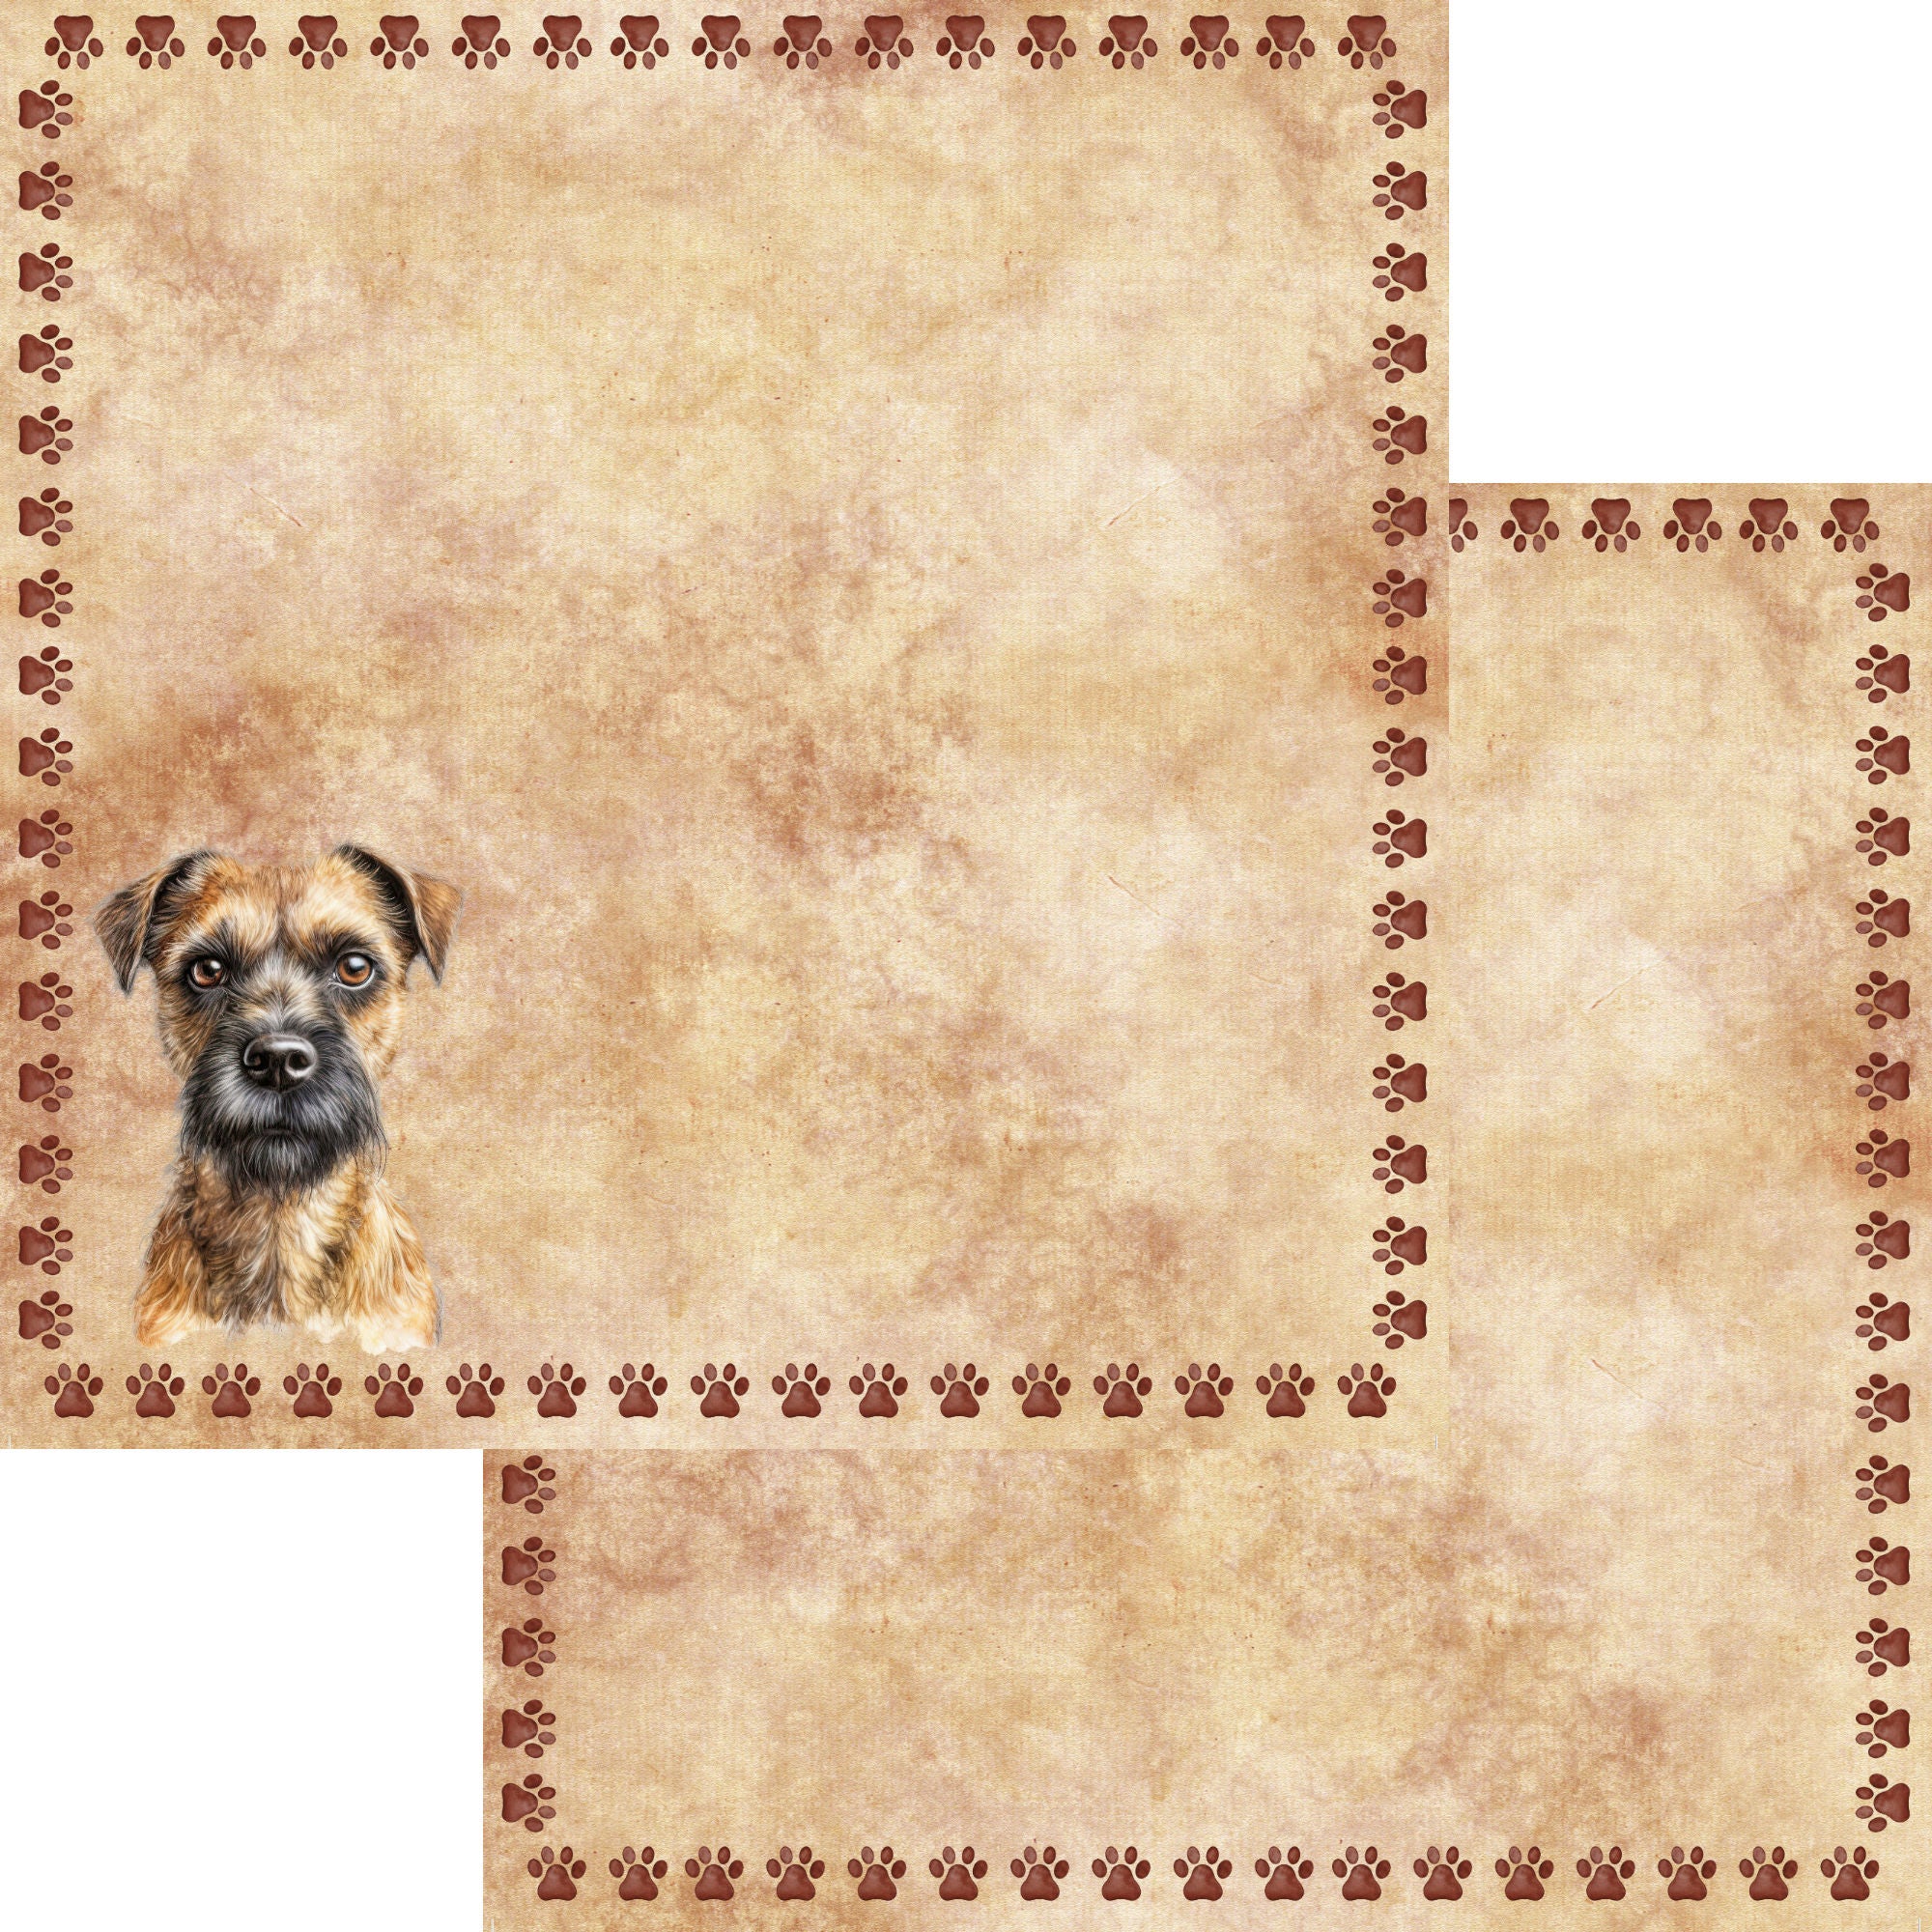 Dog Breeds Collection Border Terrier 12 x 12 Double-Sided Scrapbook Paper by SSC Designs